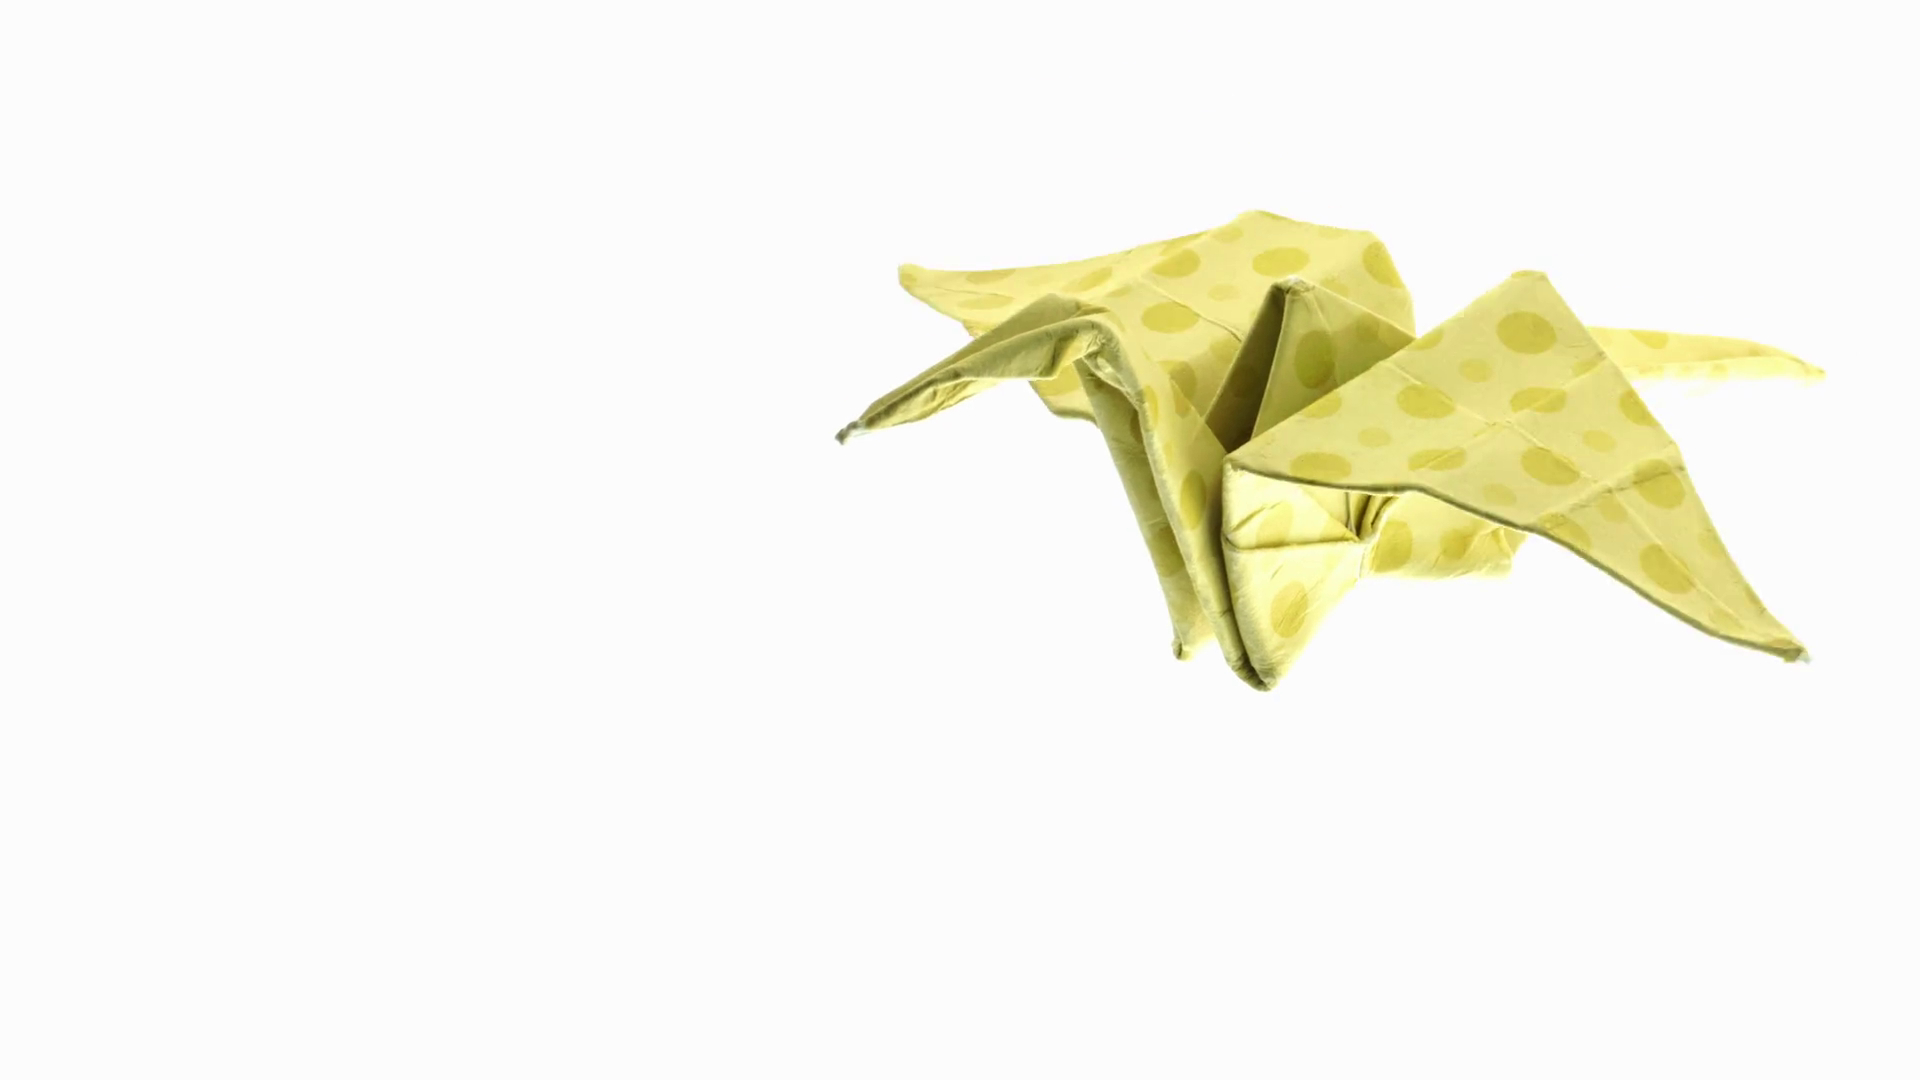 Origami Flying Dinosaur Animated Origami Crane Flying On White Background In Different Colours